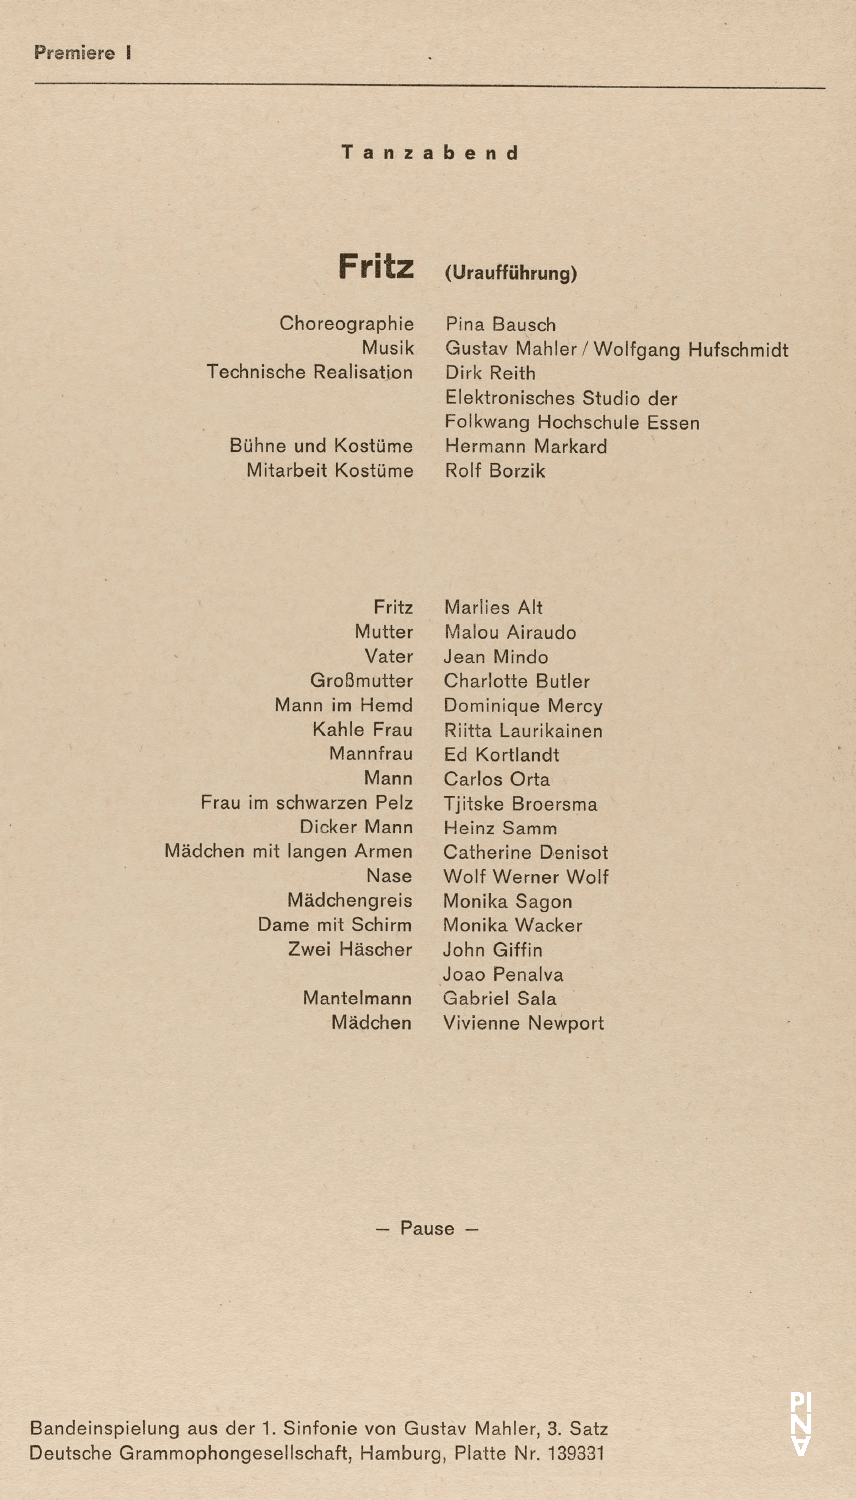 Evening leaflet for “Fritz” by Pina Bausch with Tanztheater Wuppertal, “Rodeo” by Agnes de Mille with Tanztheater Wuppertal and “The green Table” by Kurt Jooss with Tanztheater Wuppertal in in Wuppertal, Jan. 5, 1974